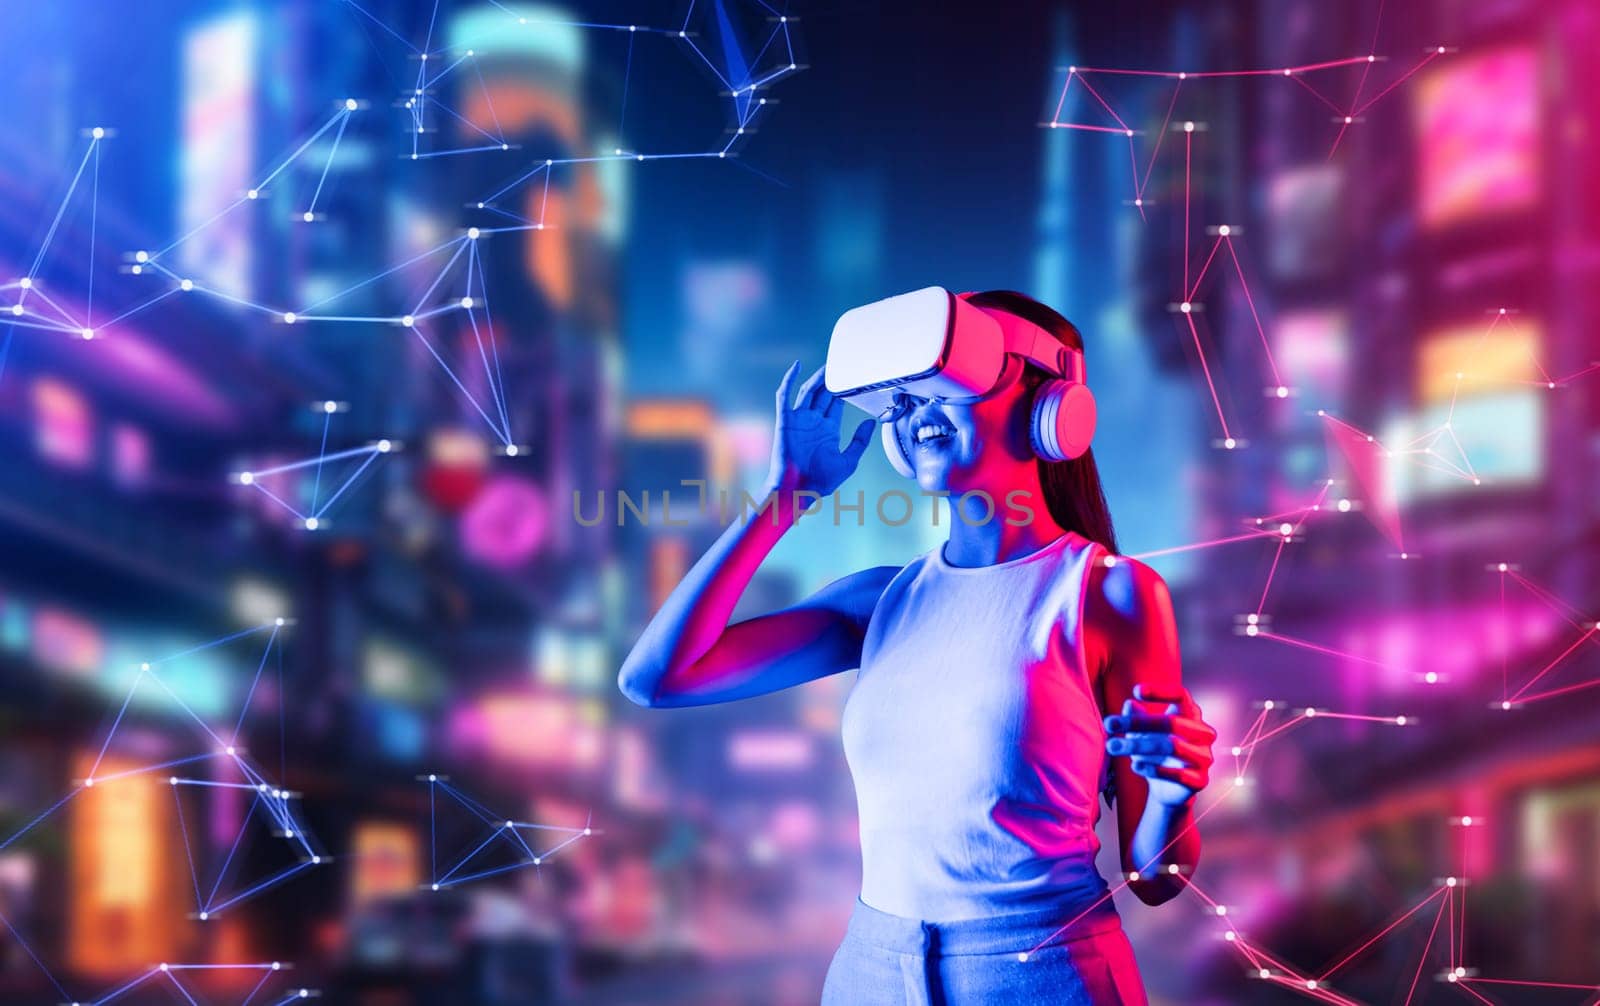 Female standing in cyberpunk style building in meta wear VR headset connecting metaverse, future cyberspace community technology. Woman touching goggle looking far virtual construction. Hallucination.